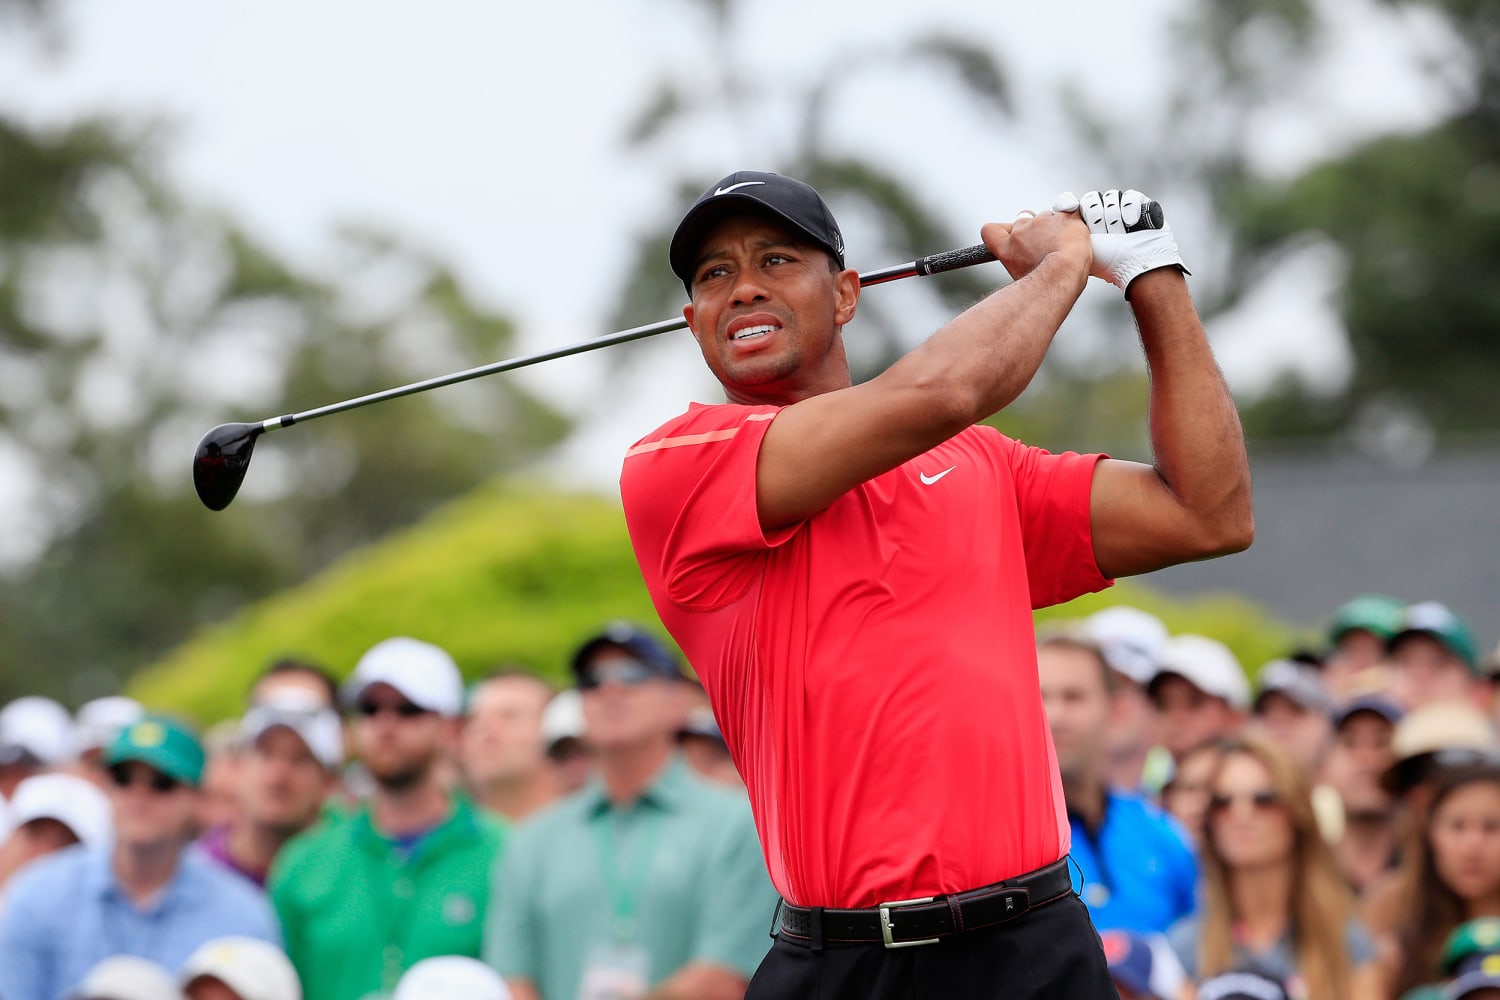 Tiger Woods says he will ‘never’ play golf again full time